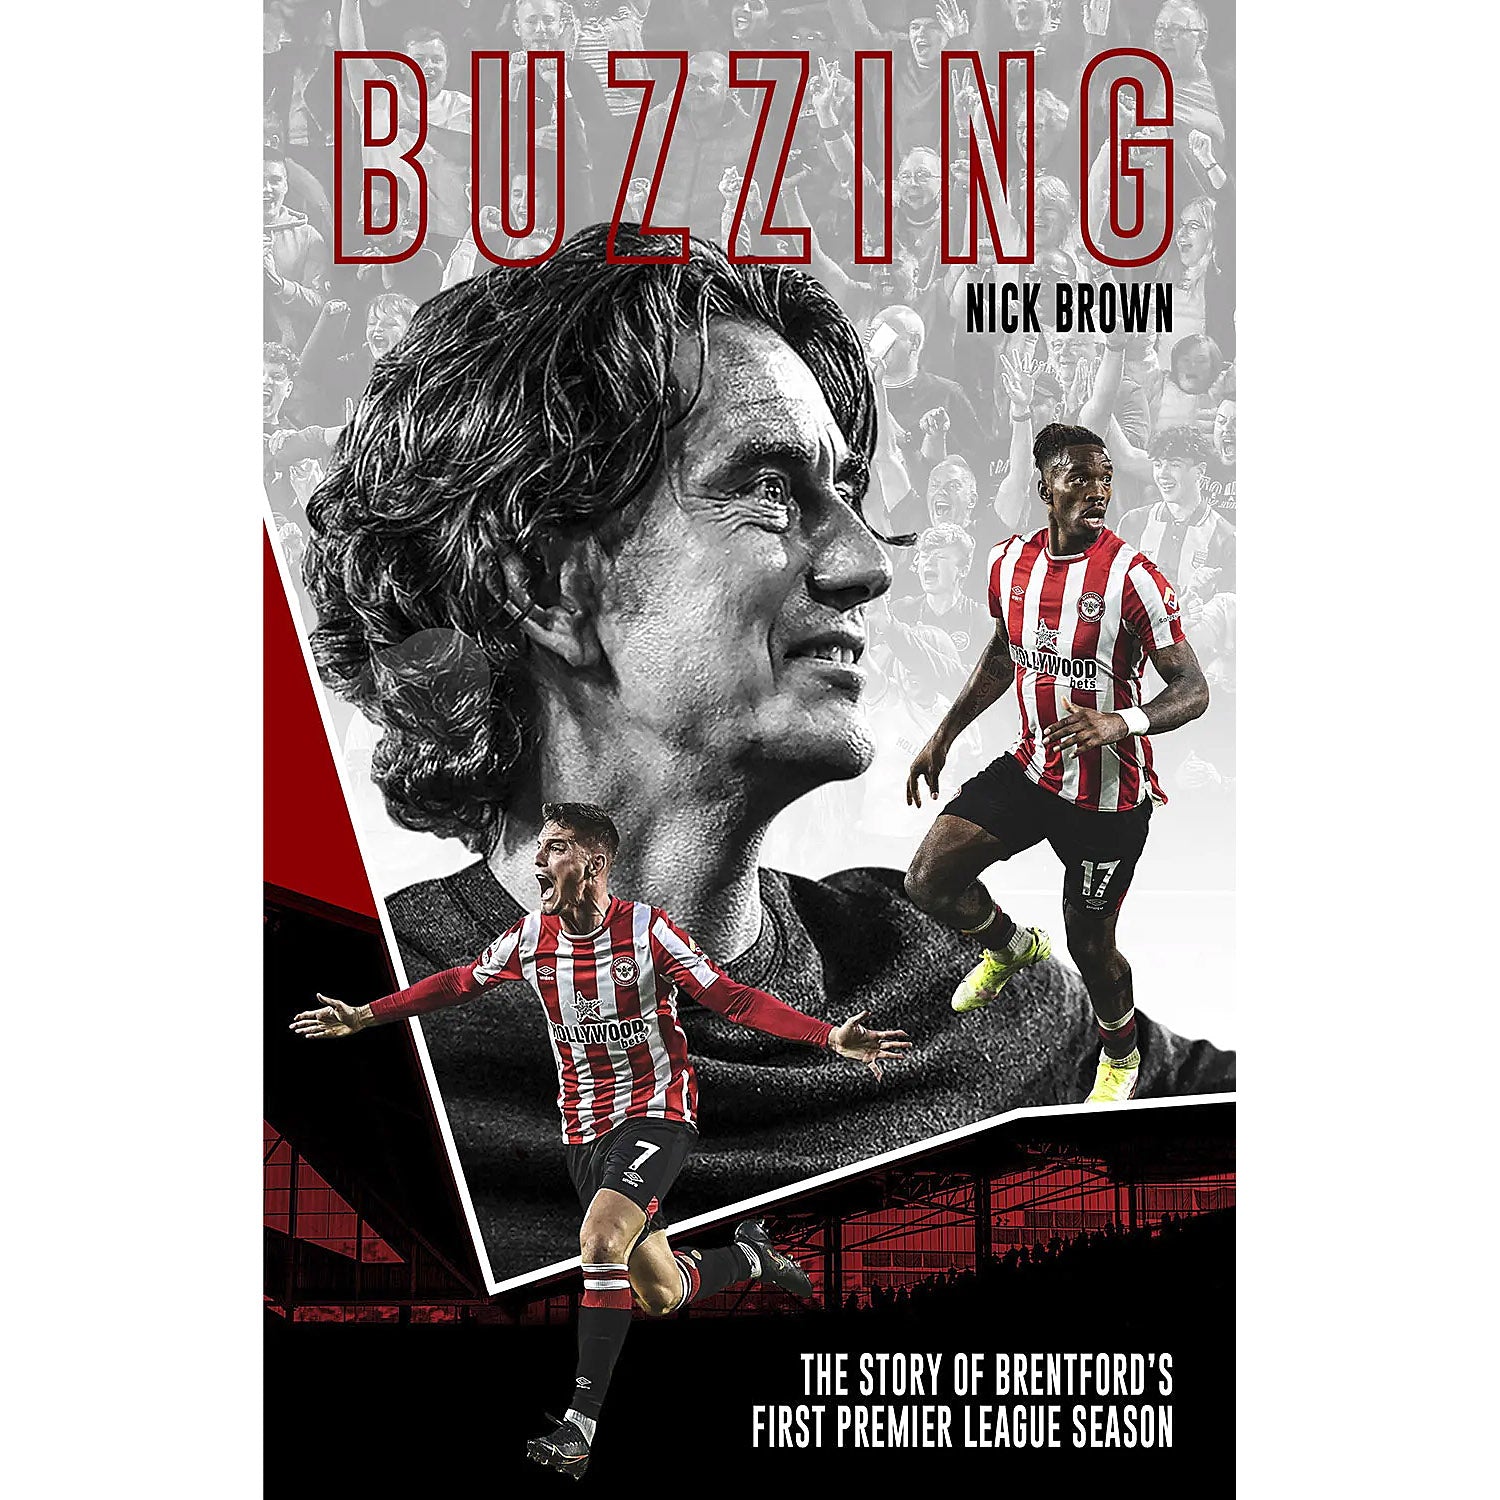 Buzzing – The Story of Brentford's First Premier League Season